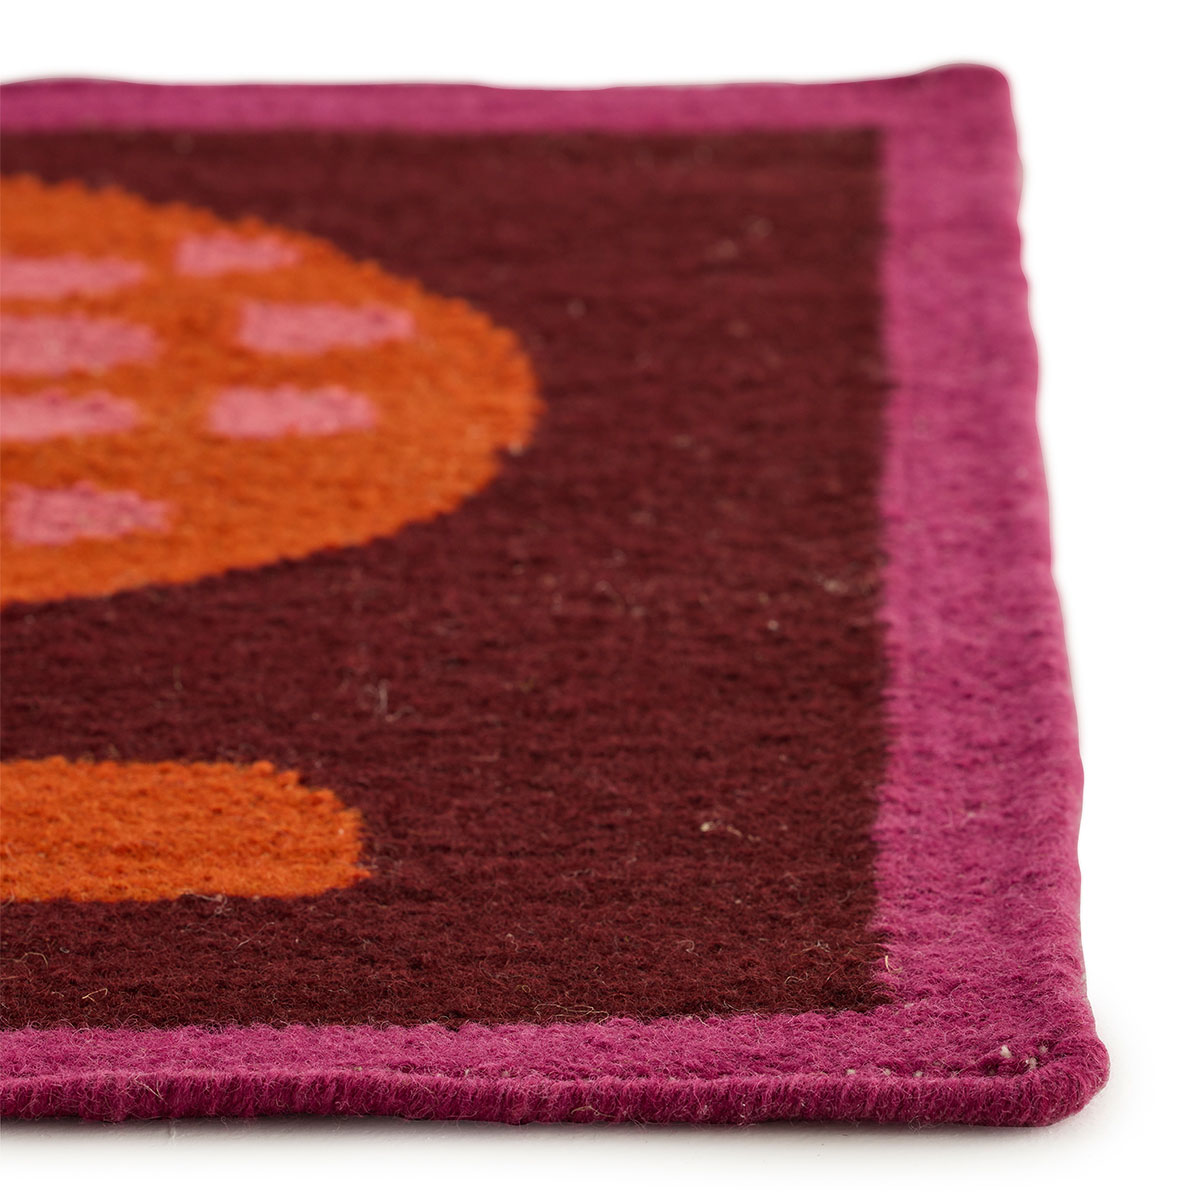 The corner of an abstract red and maroon rug called Happipod Berry.